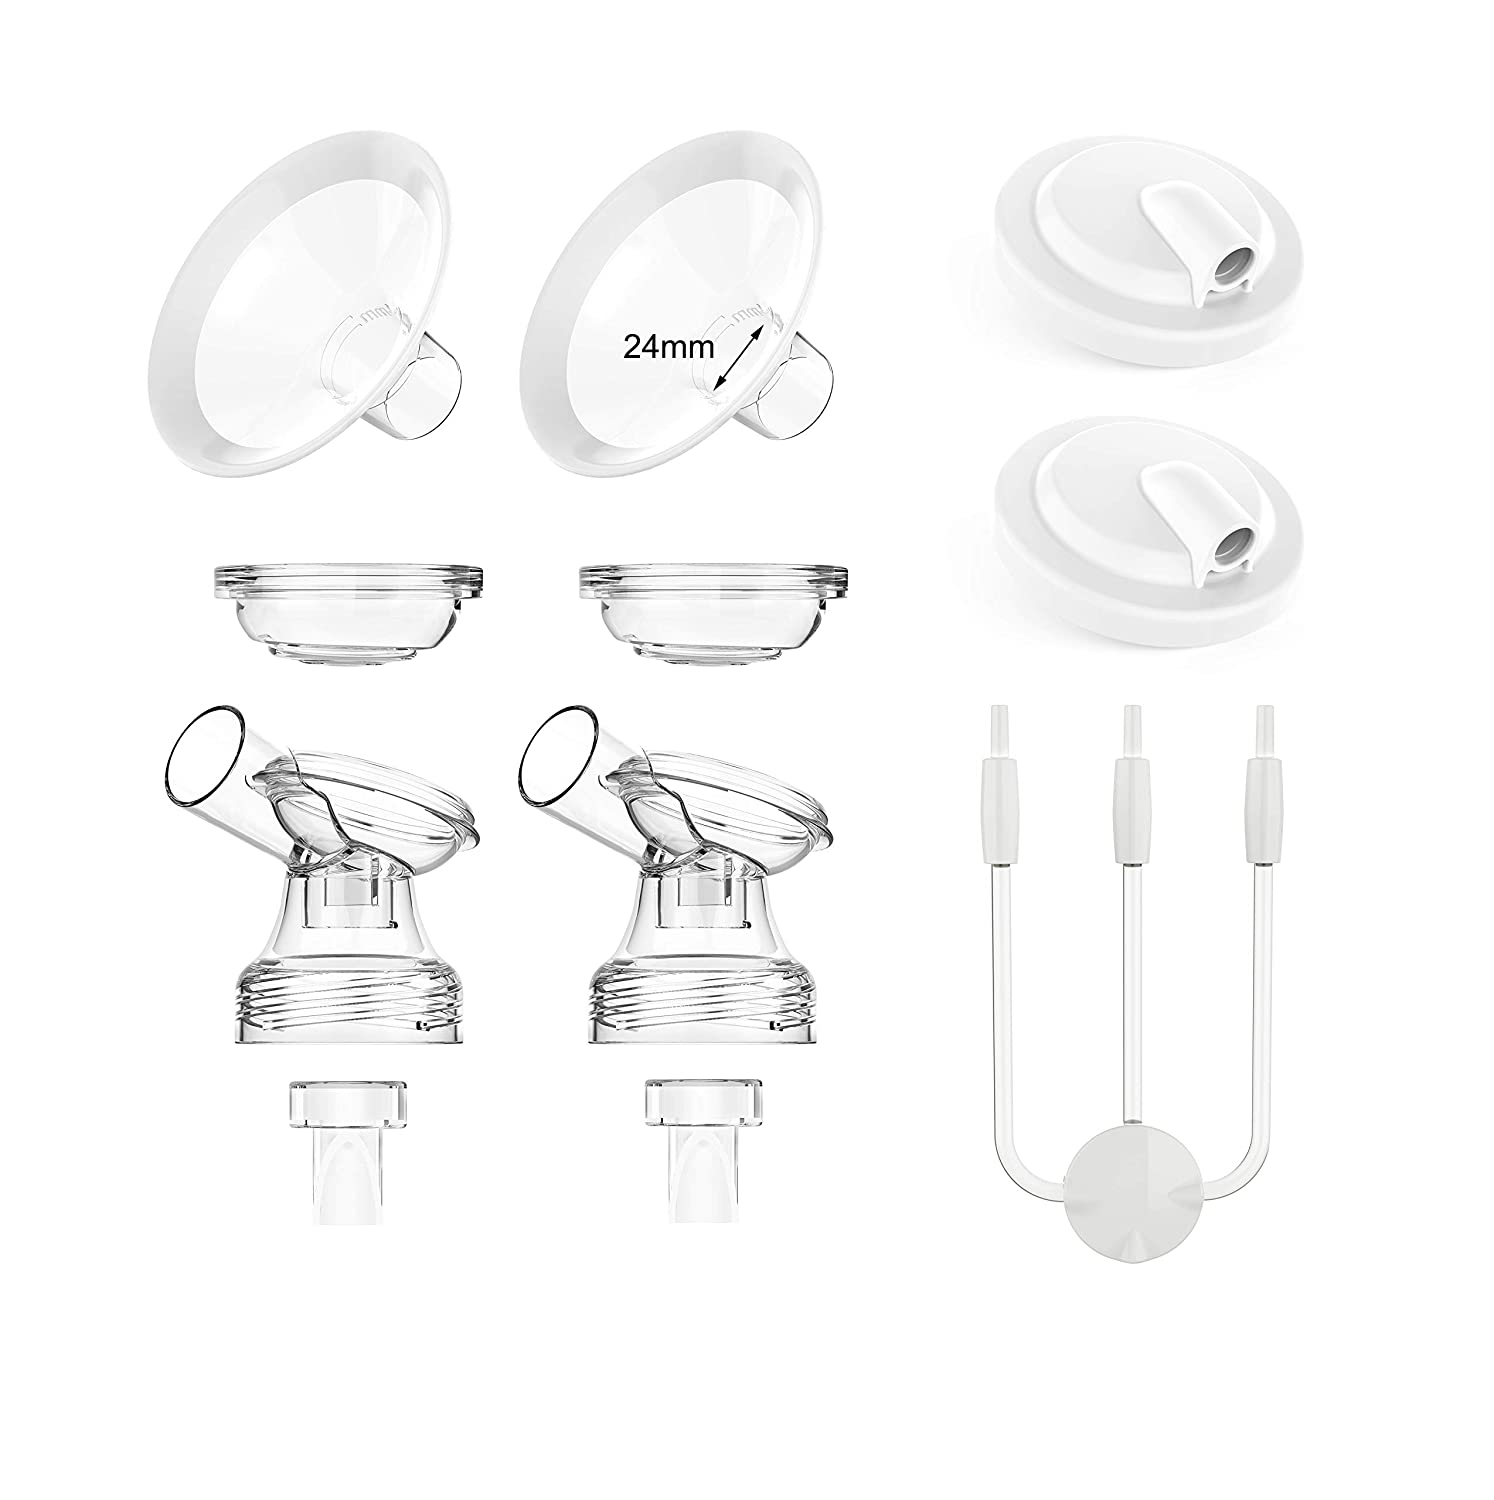 Buy Now! Medela Freestyle Breast Pump Spare Parts Kit